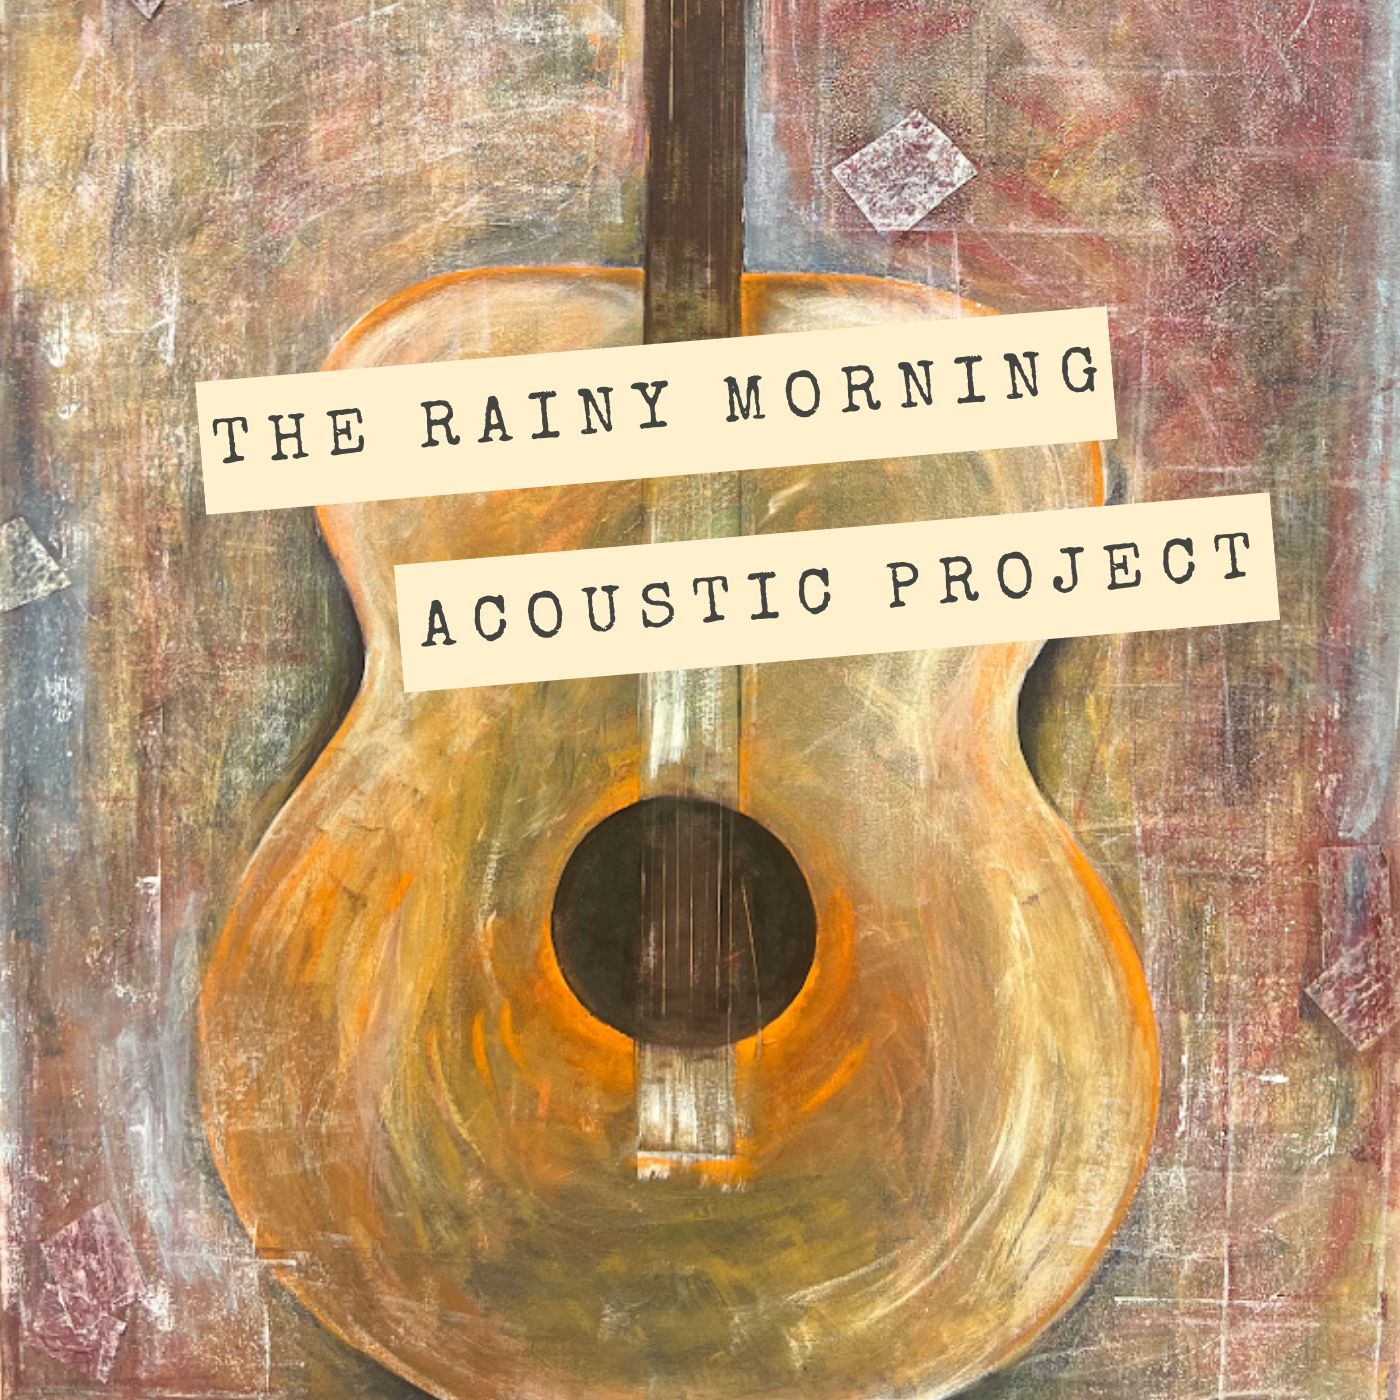 Steven Hicksout with The Rainy Morning Acoustic Project